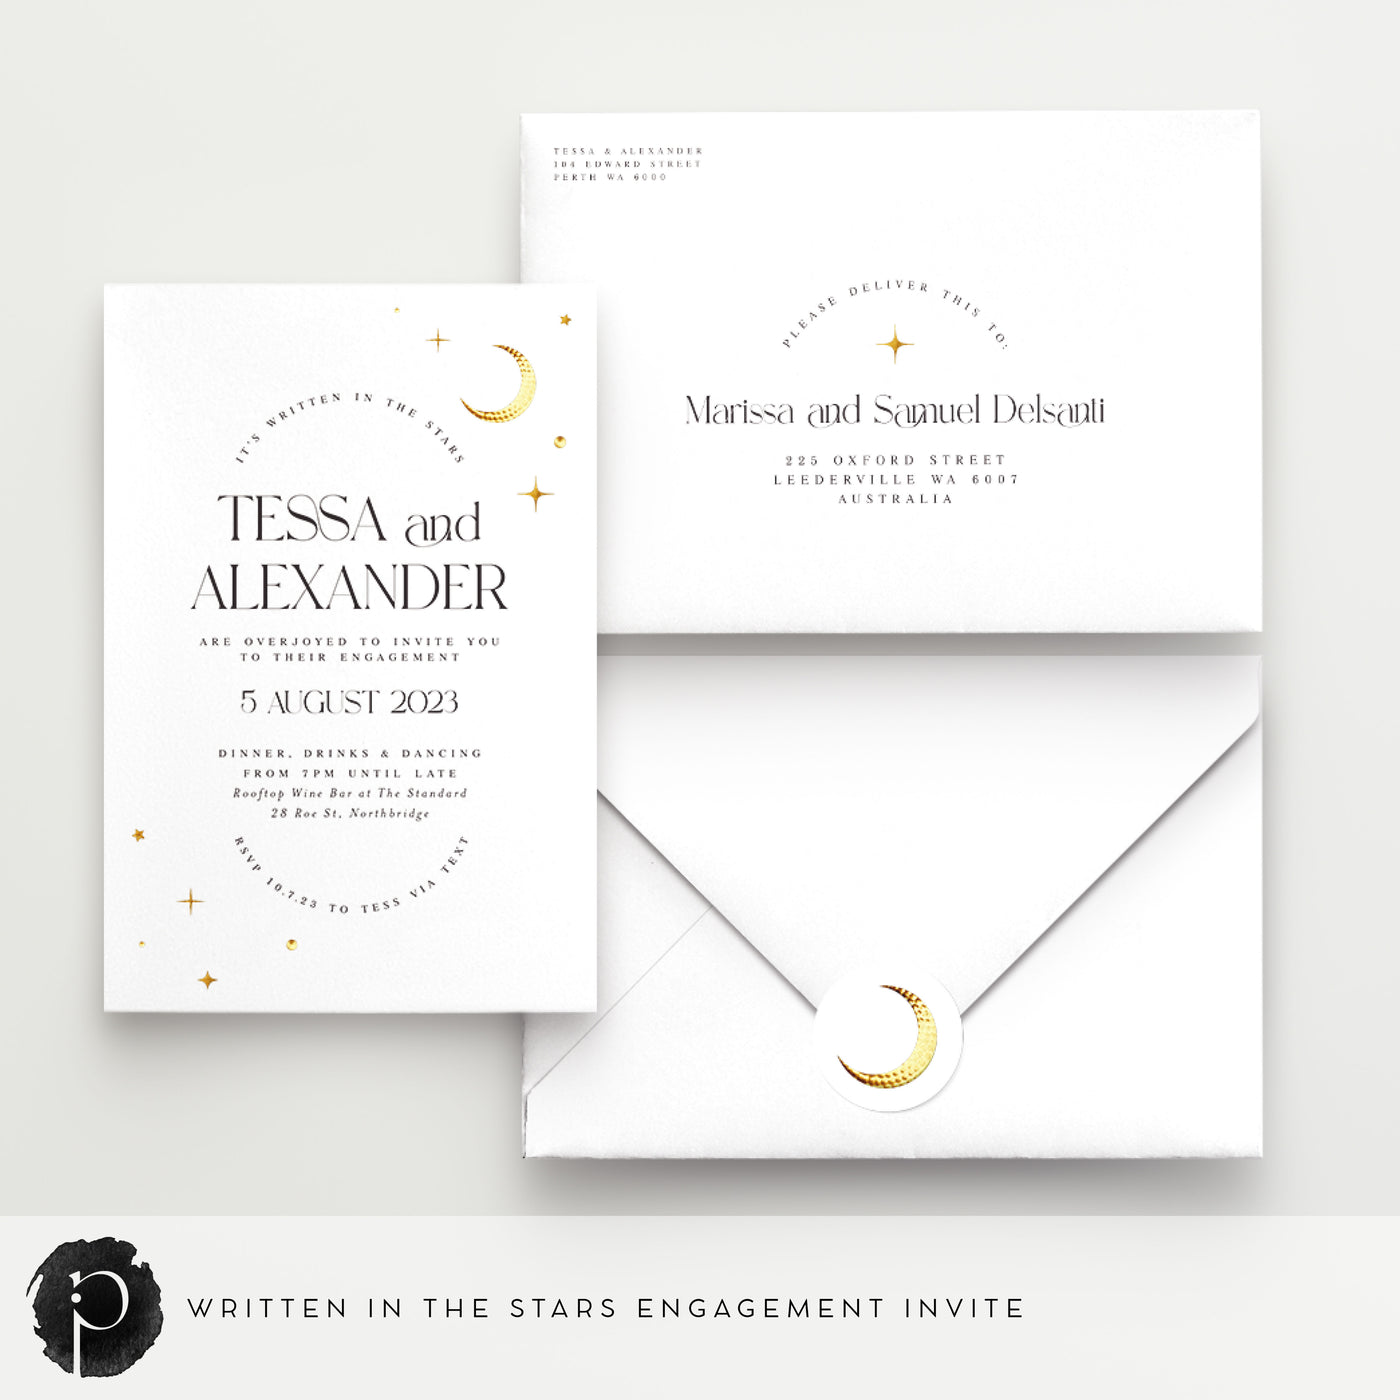 Written In The Stars - Engagement Invitations